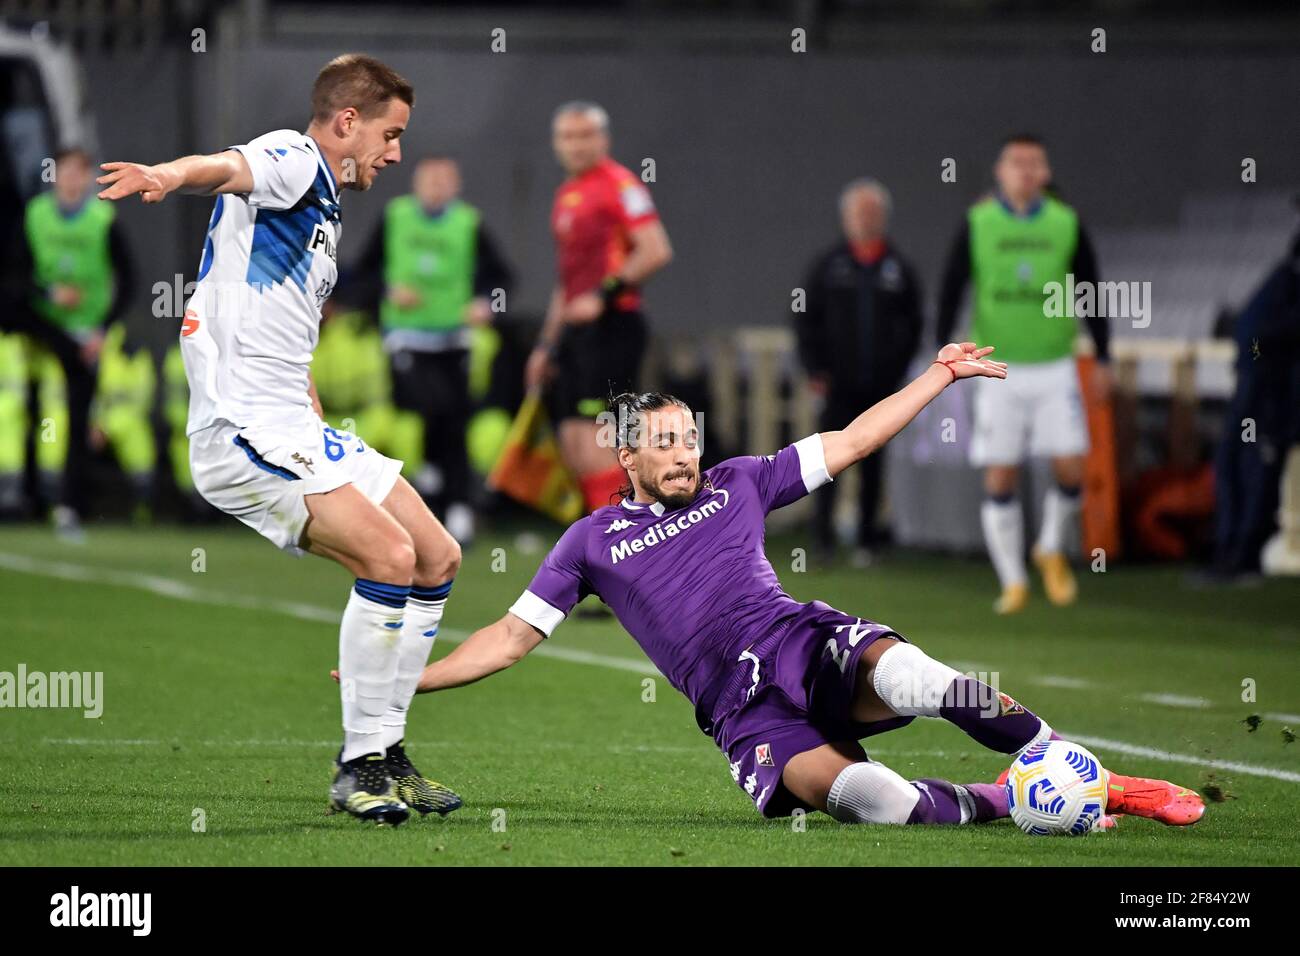 Florence, Italy. 11th Apr, 2021. Mario Pasalic of Atalanta BC and Martin Caceres of ACF Fiorentina compete for the ball during the Serie A football match between ACF Fiorentina and Atalanta Bergamasca Calcio at Artemio Franchi stadium in Firenze (Italy), April 11th, 2021. Photo Andrea Staccioli/Insidefoto Credit: insidefoto srl/Alamy Live News Stock Photo